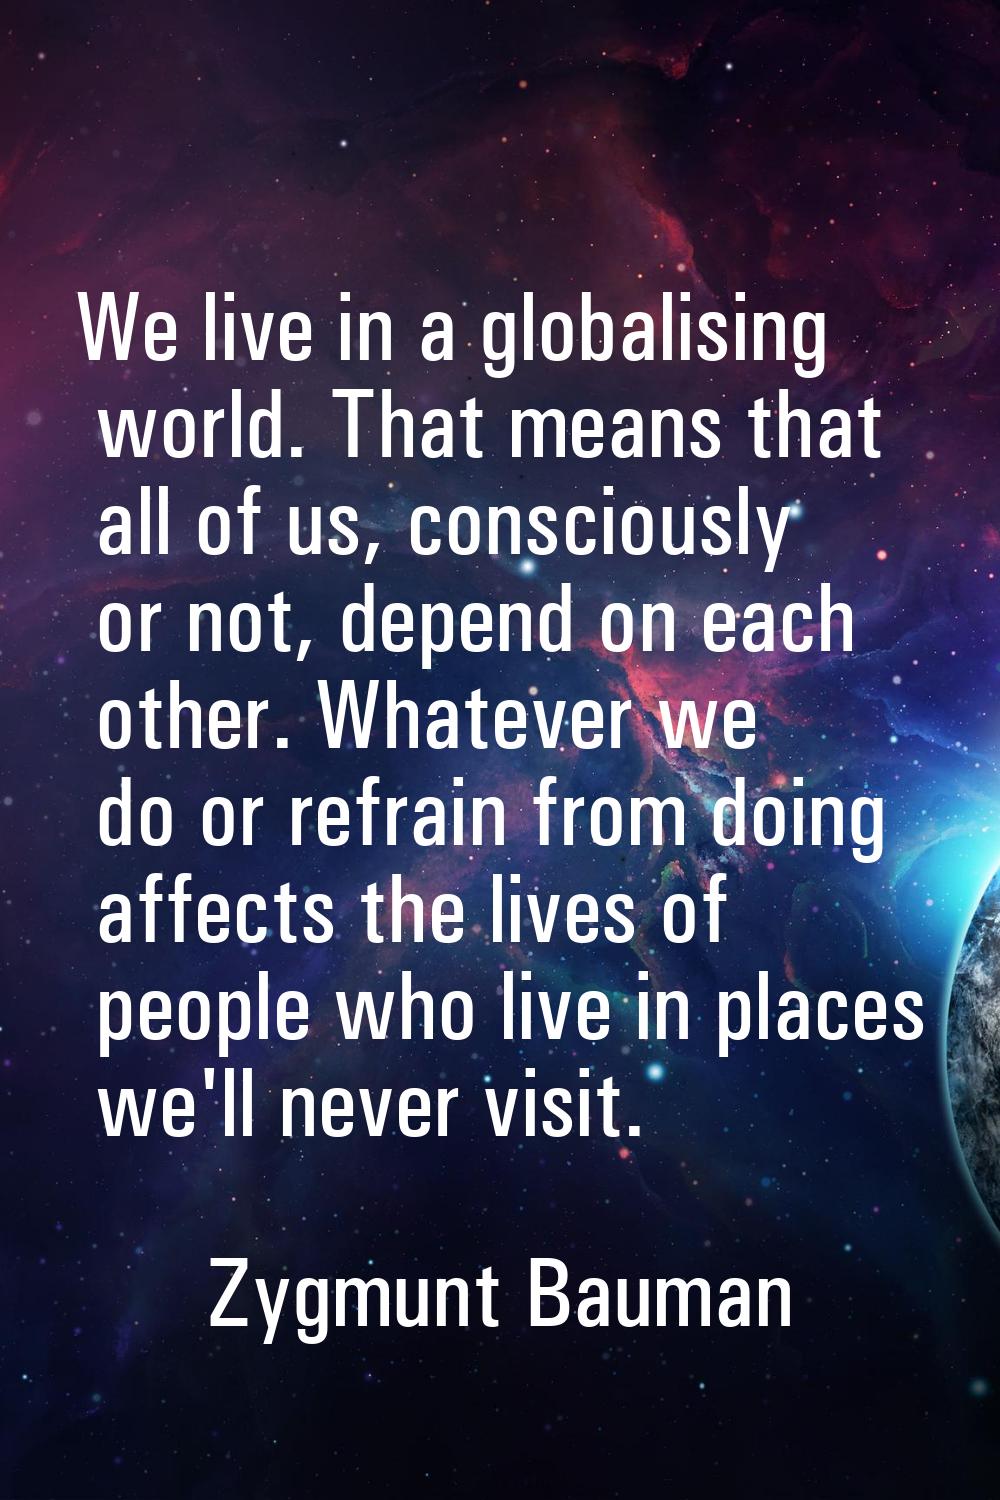 We live in a globalising world. That means that all of us, consciously or not, depend on each other